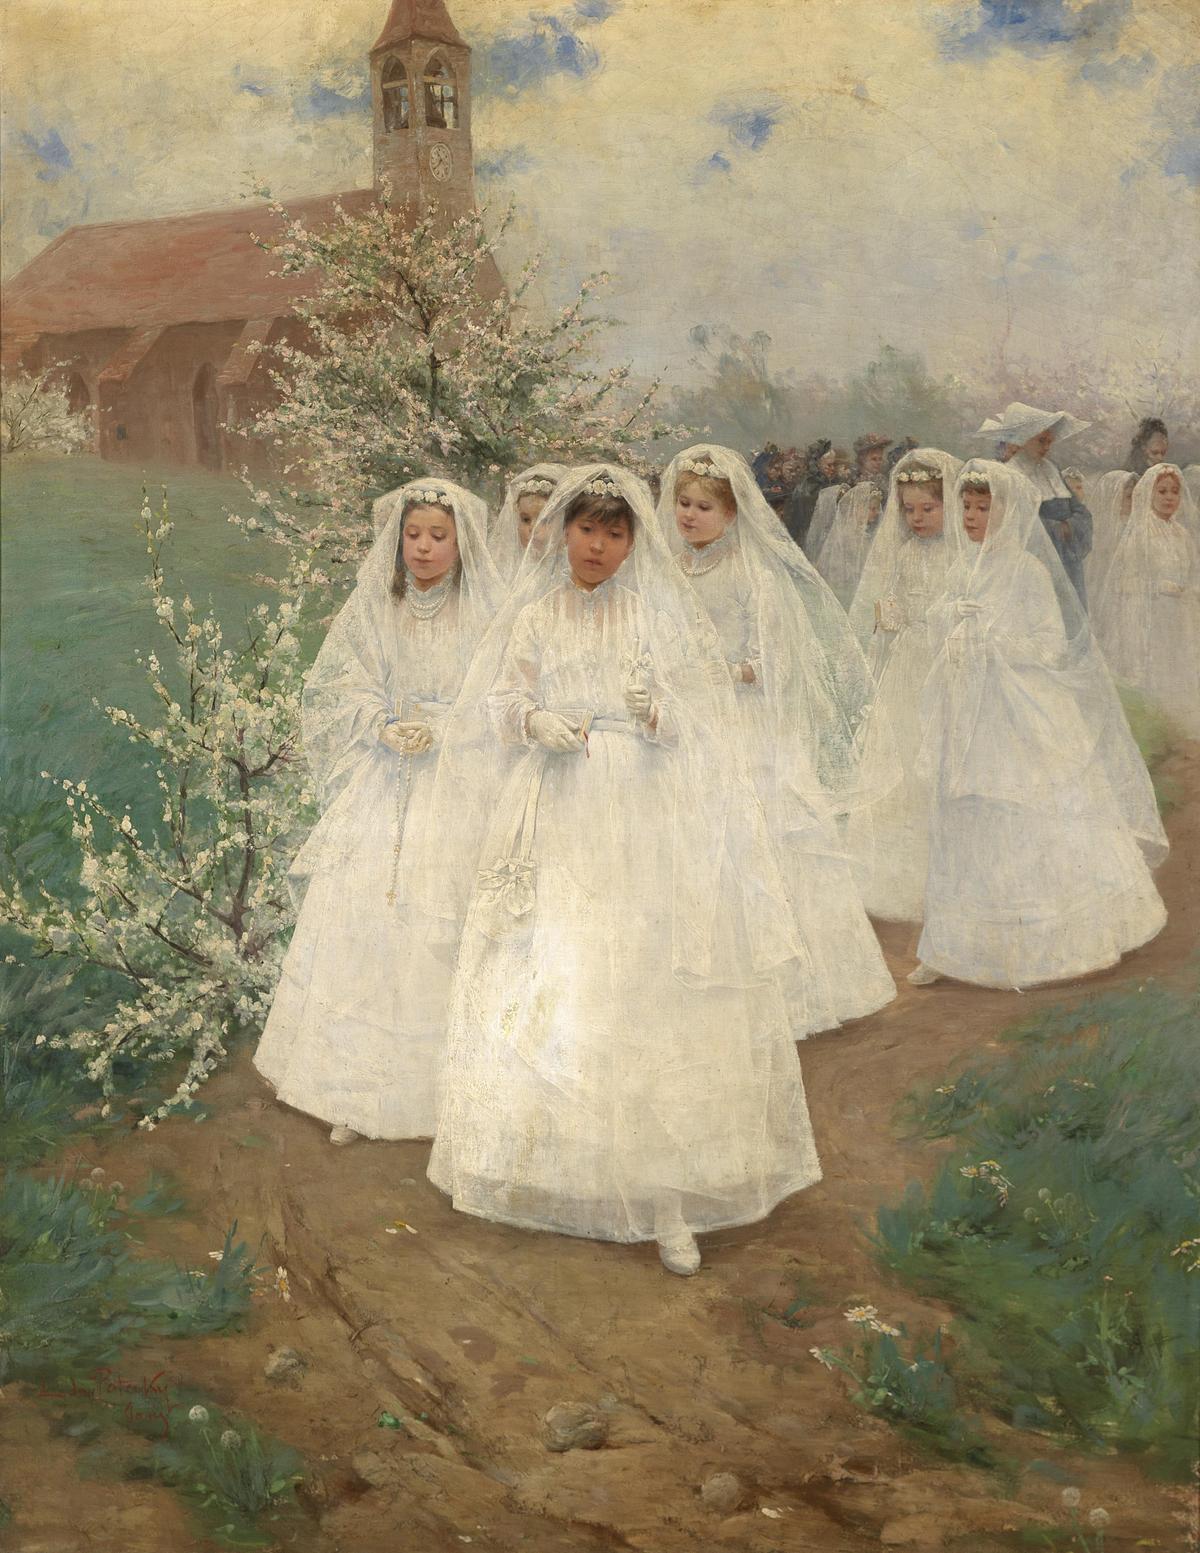 Painting of a "First Communion" by Laszlo Pataky. (Public Domain)